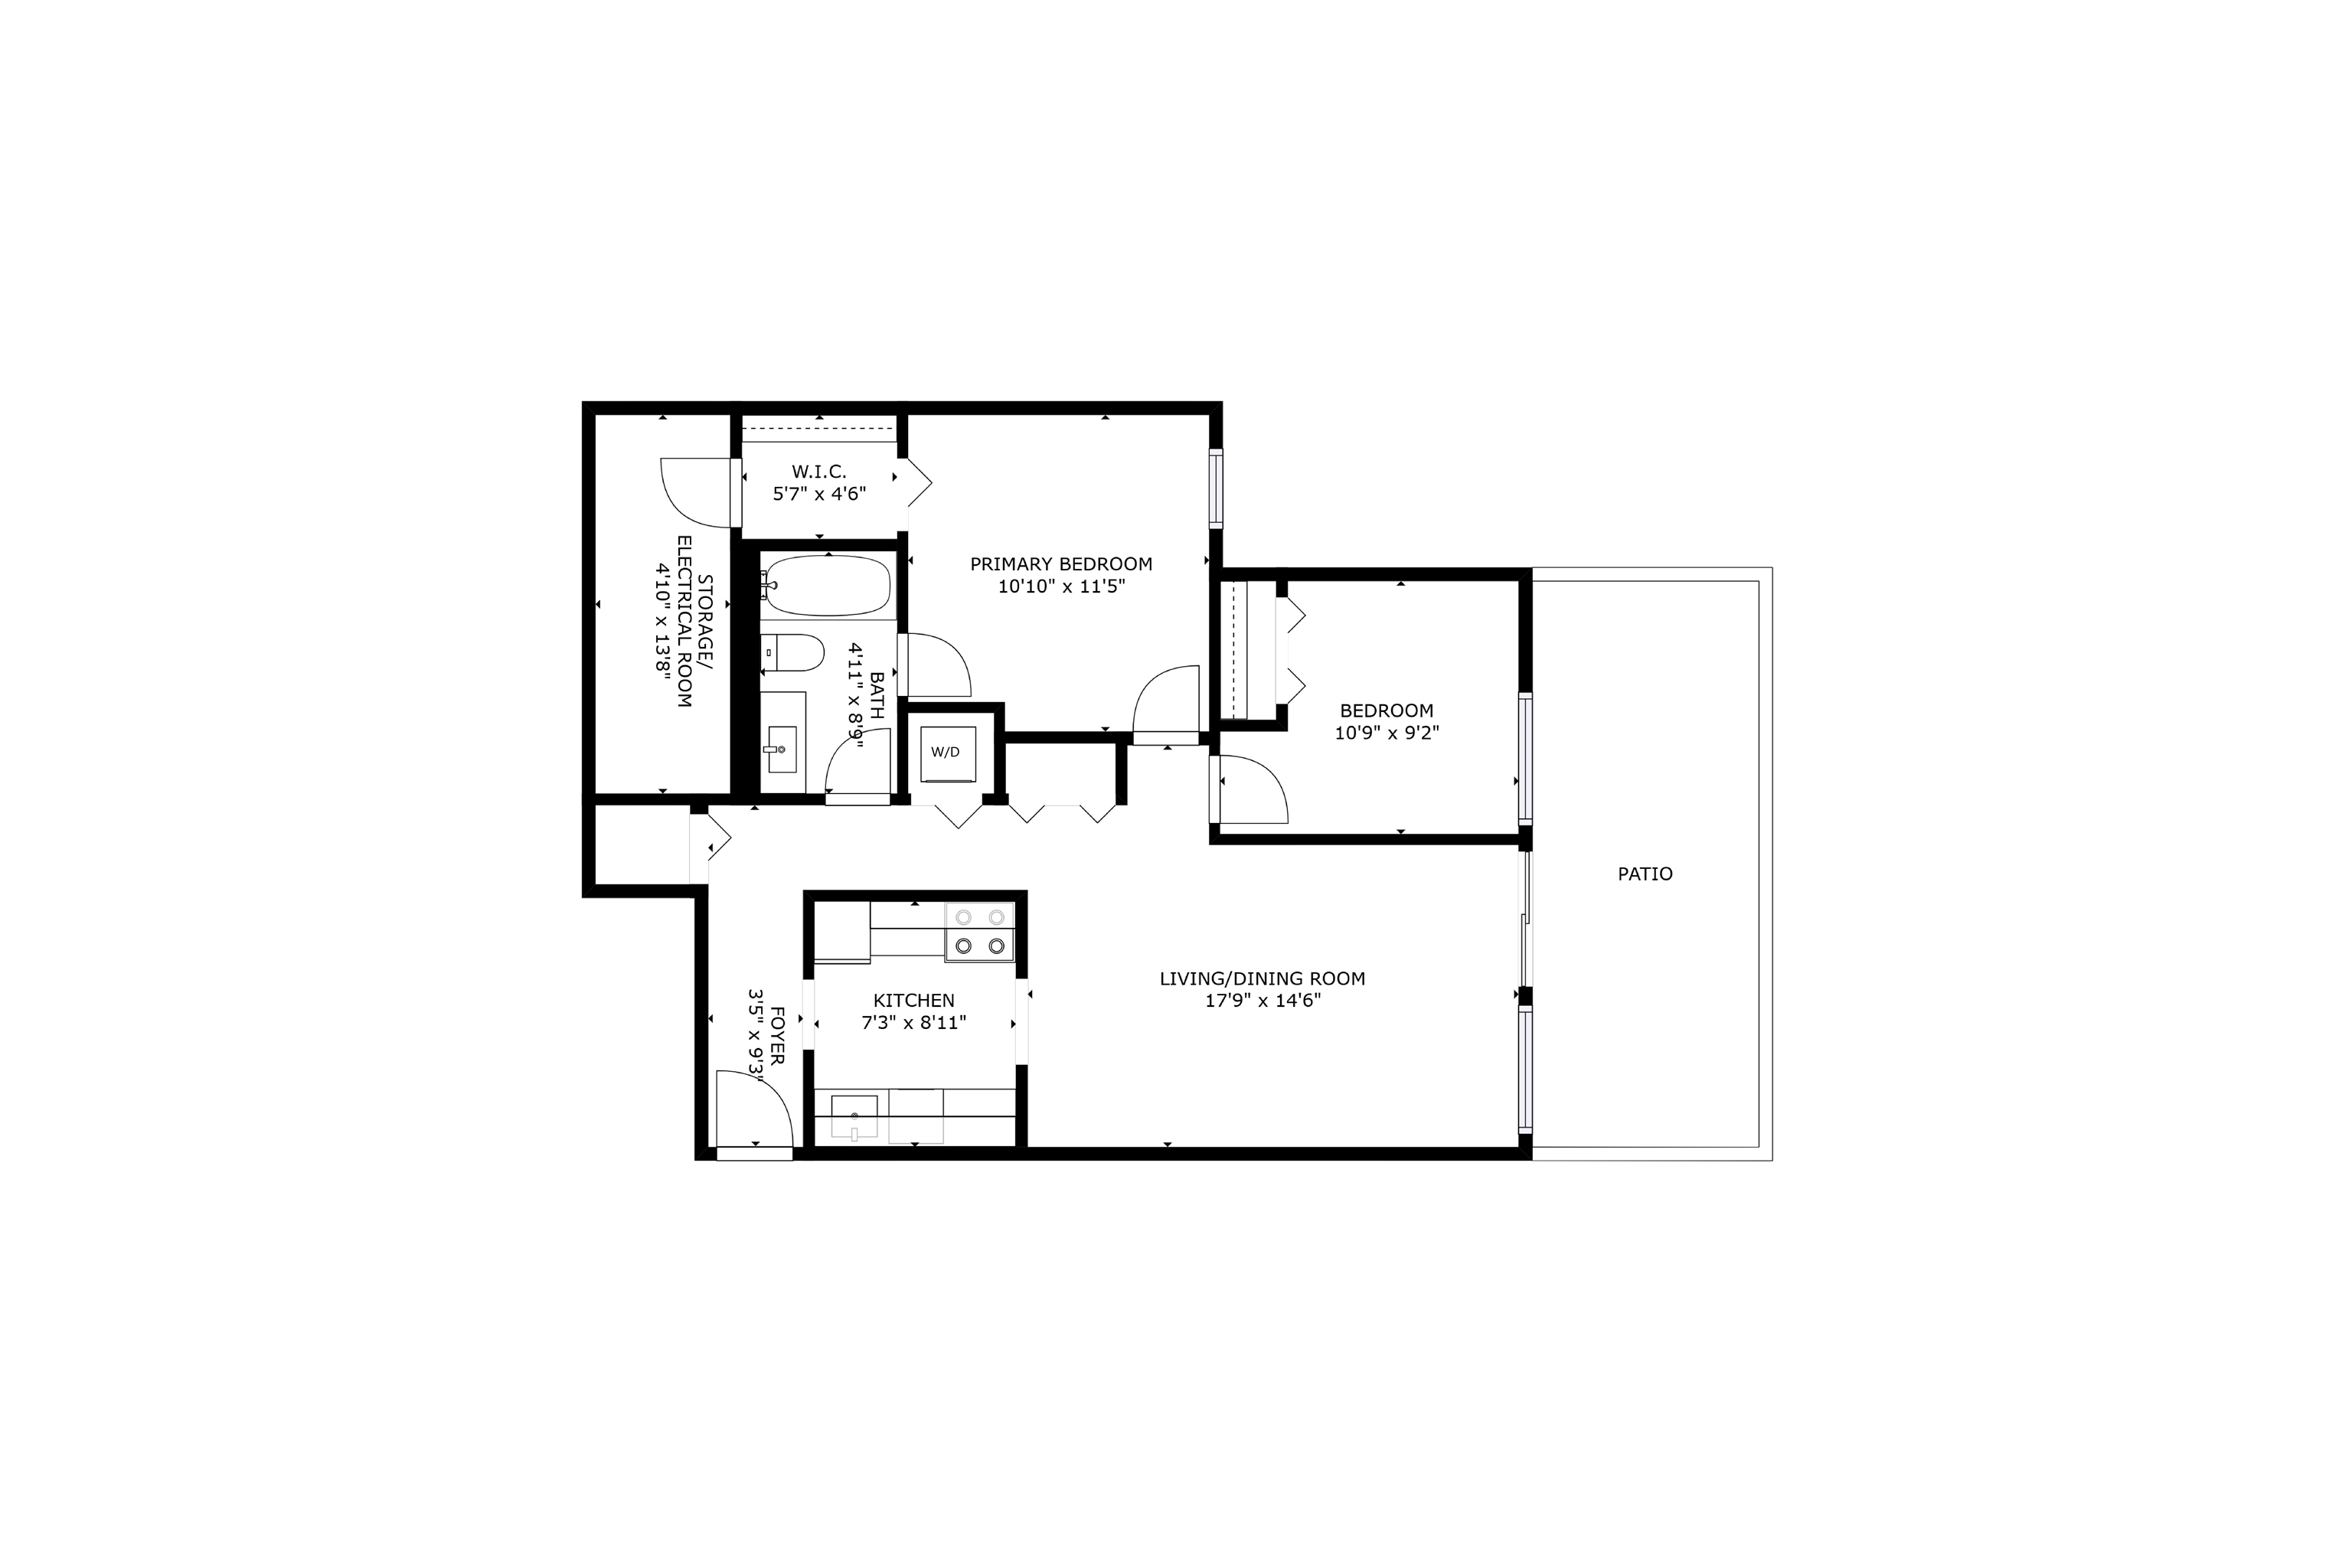 Listing image of 2060 PURCELL WAY